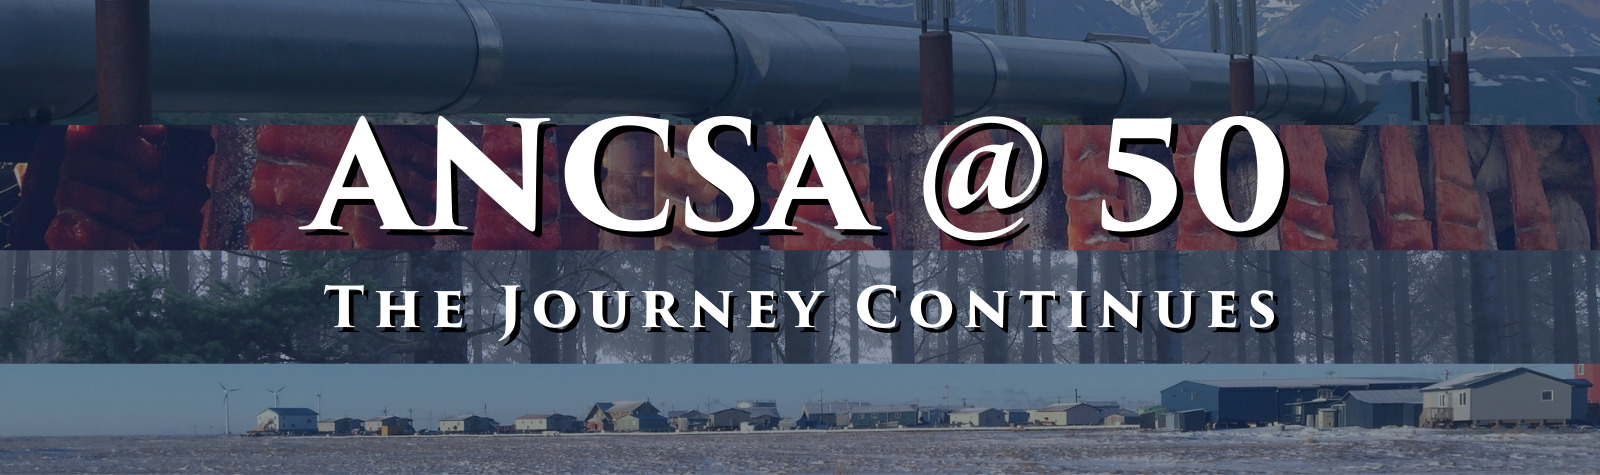 ANCSA @ 50: The Journey Continues. A series of broadcasts to commemorate the 50th anniversary of the Alaska Native Claims Settlement Act landmark legislation that changed Alaska forever